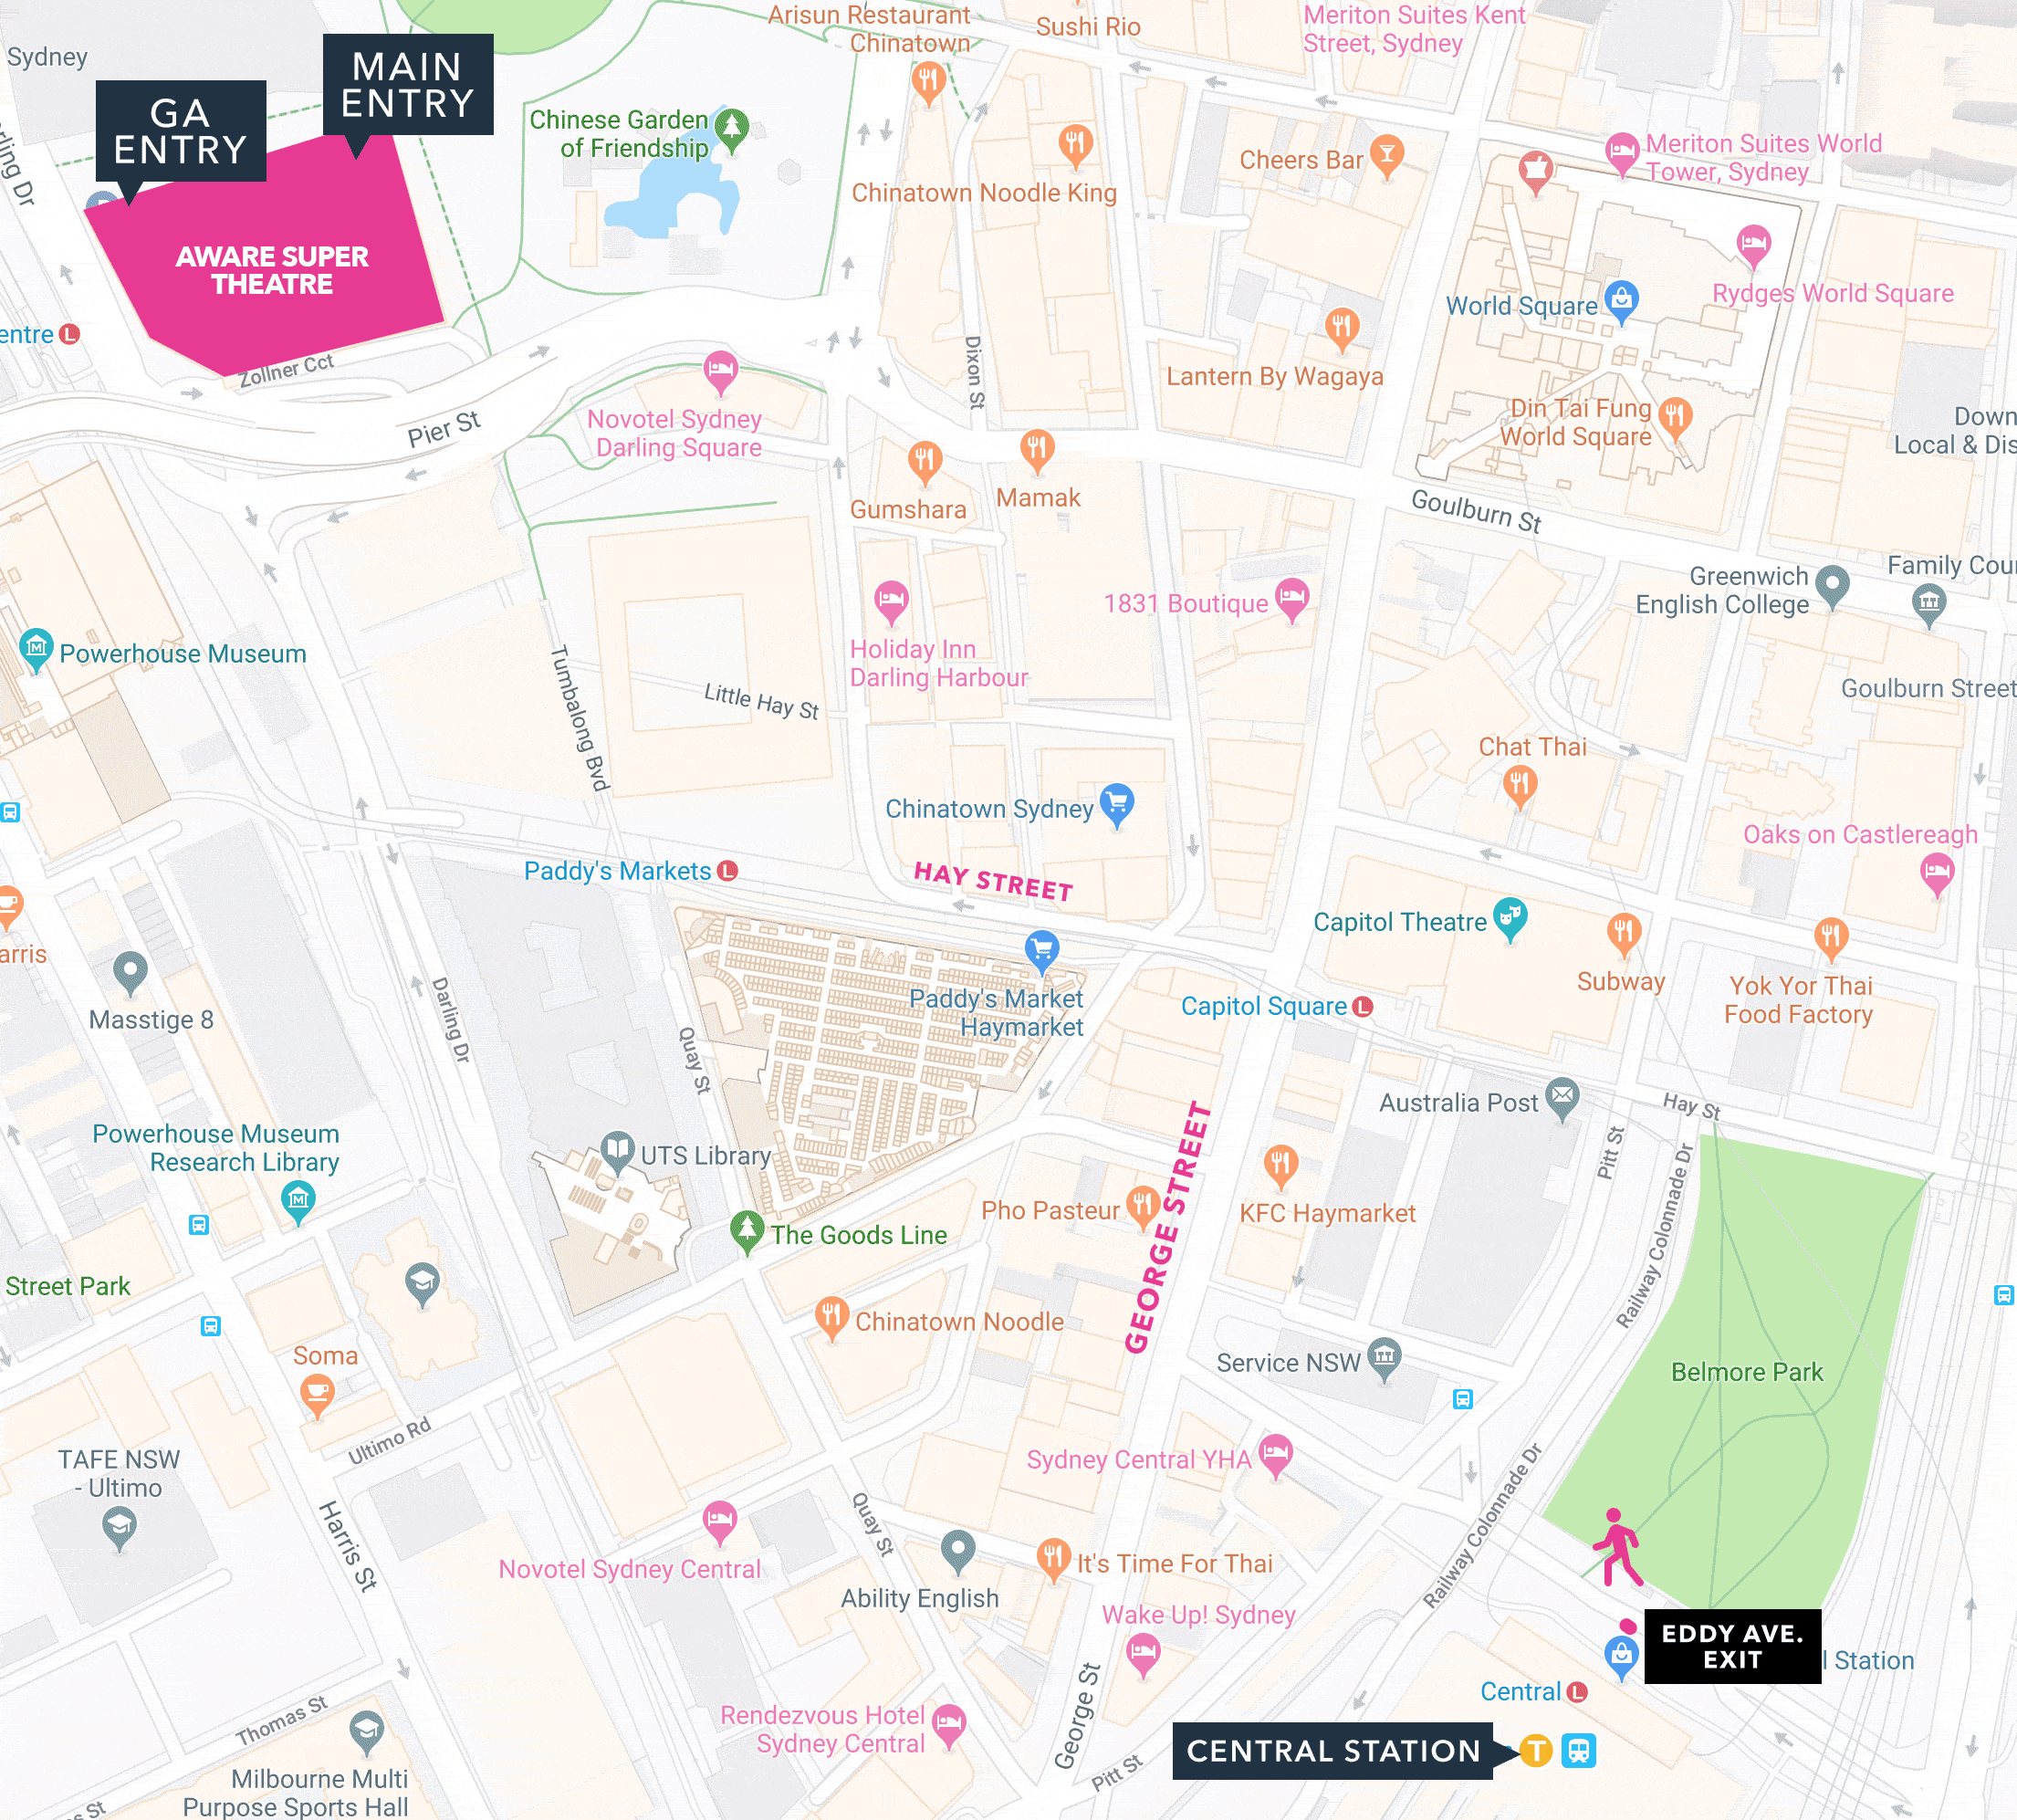 Directions for Walking from Central Station